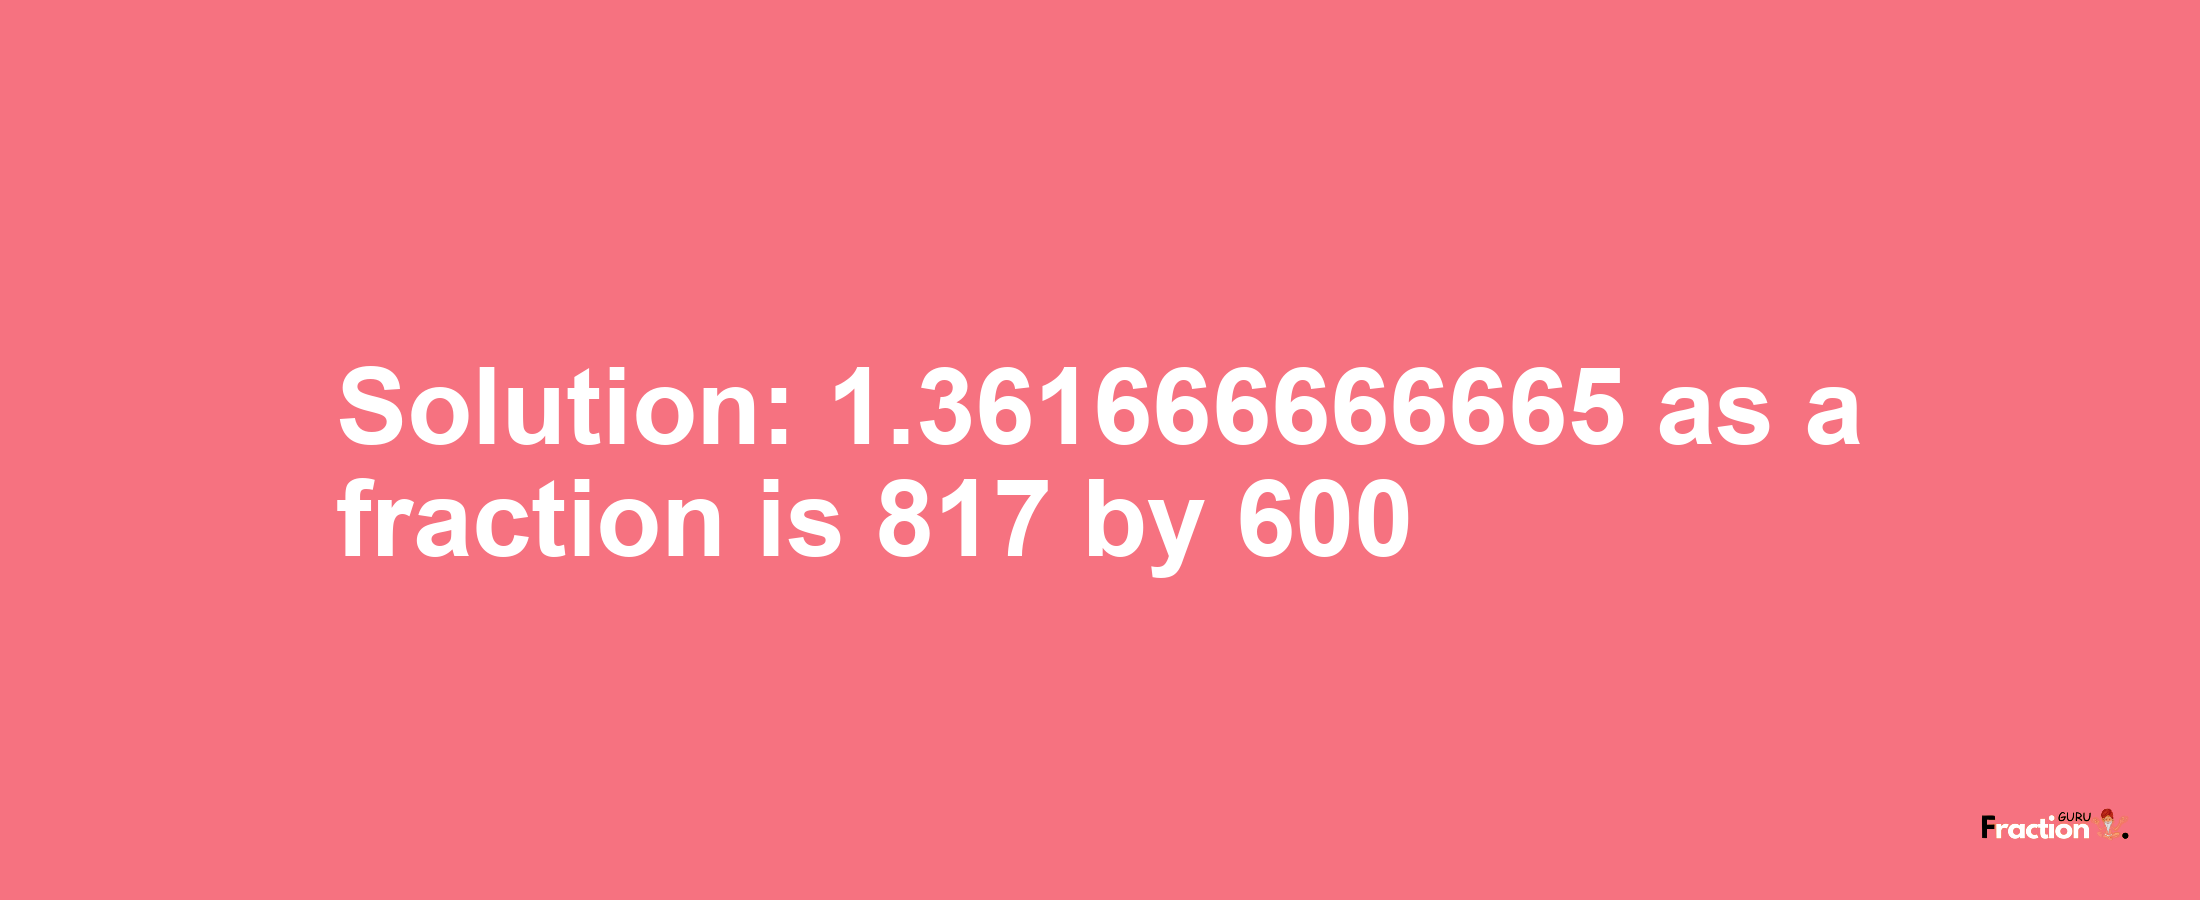 Solution:1.361666666665 as a fraction is 817/600